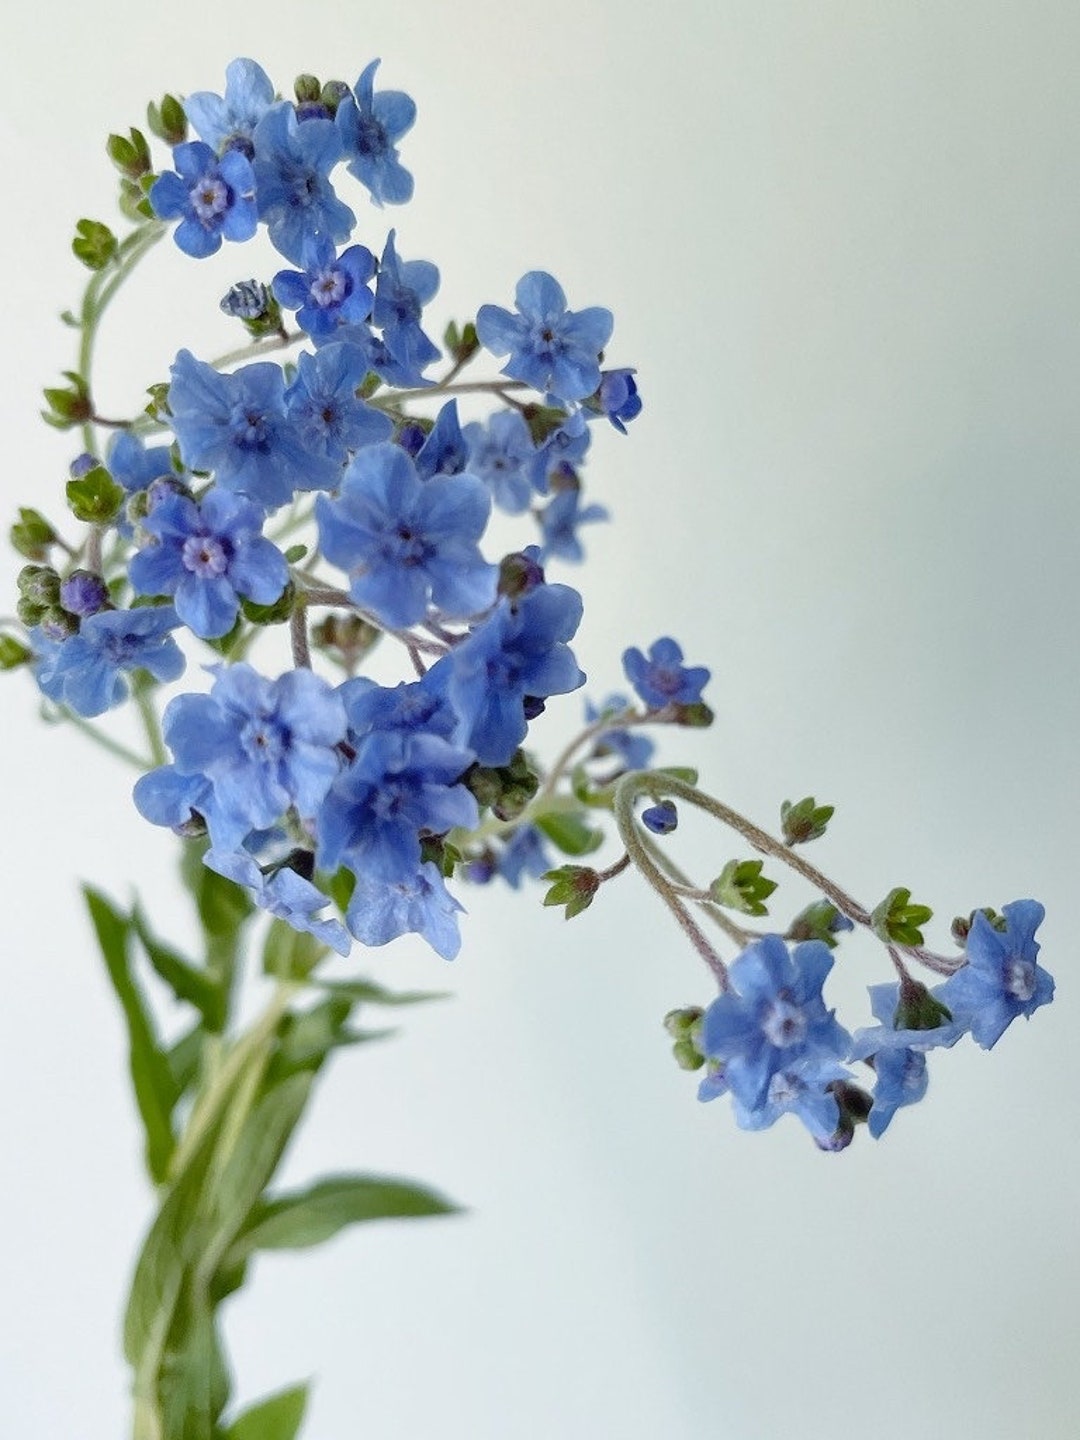 Summer forget-me-not (Anchusa)